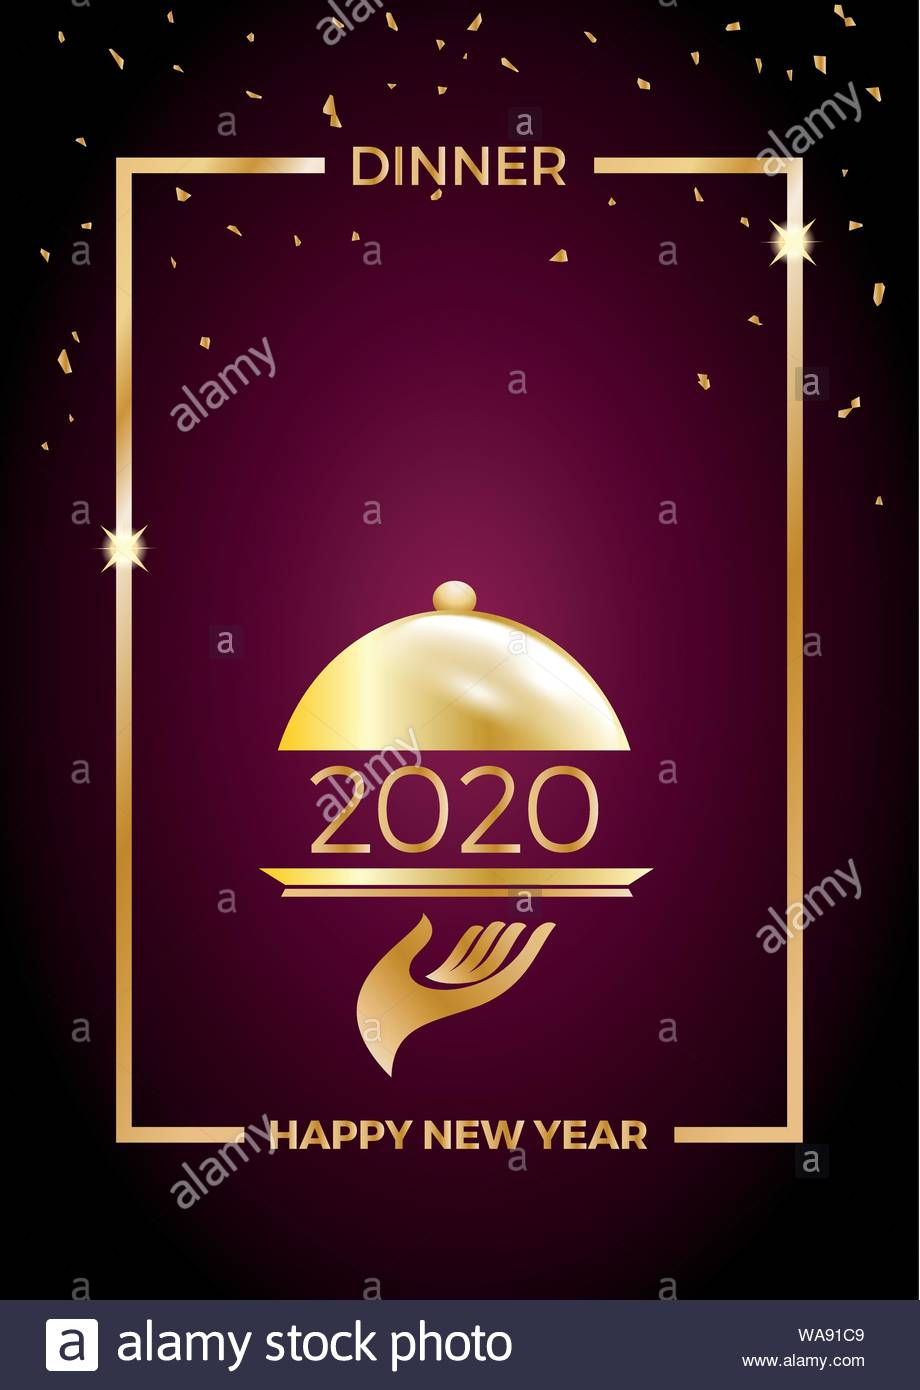 2020, New Year's Eve Dinner, Template For Poster, Cover And Pertaining To New Years Eve Menu Template